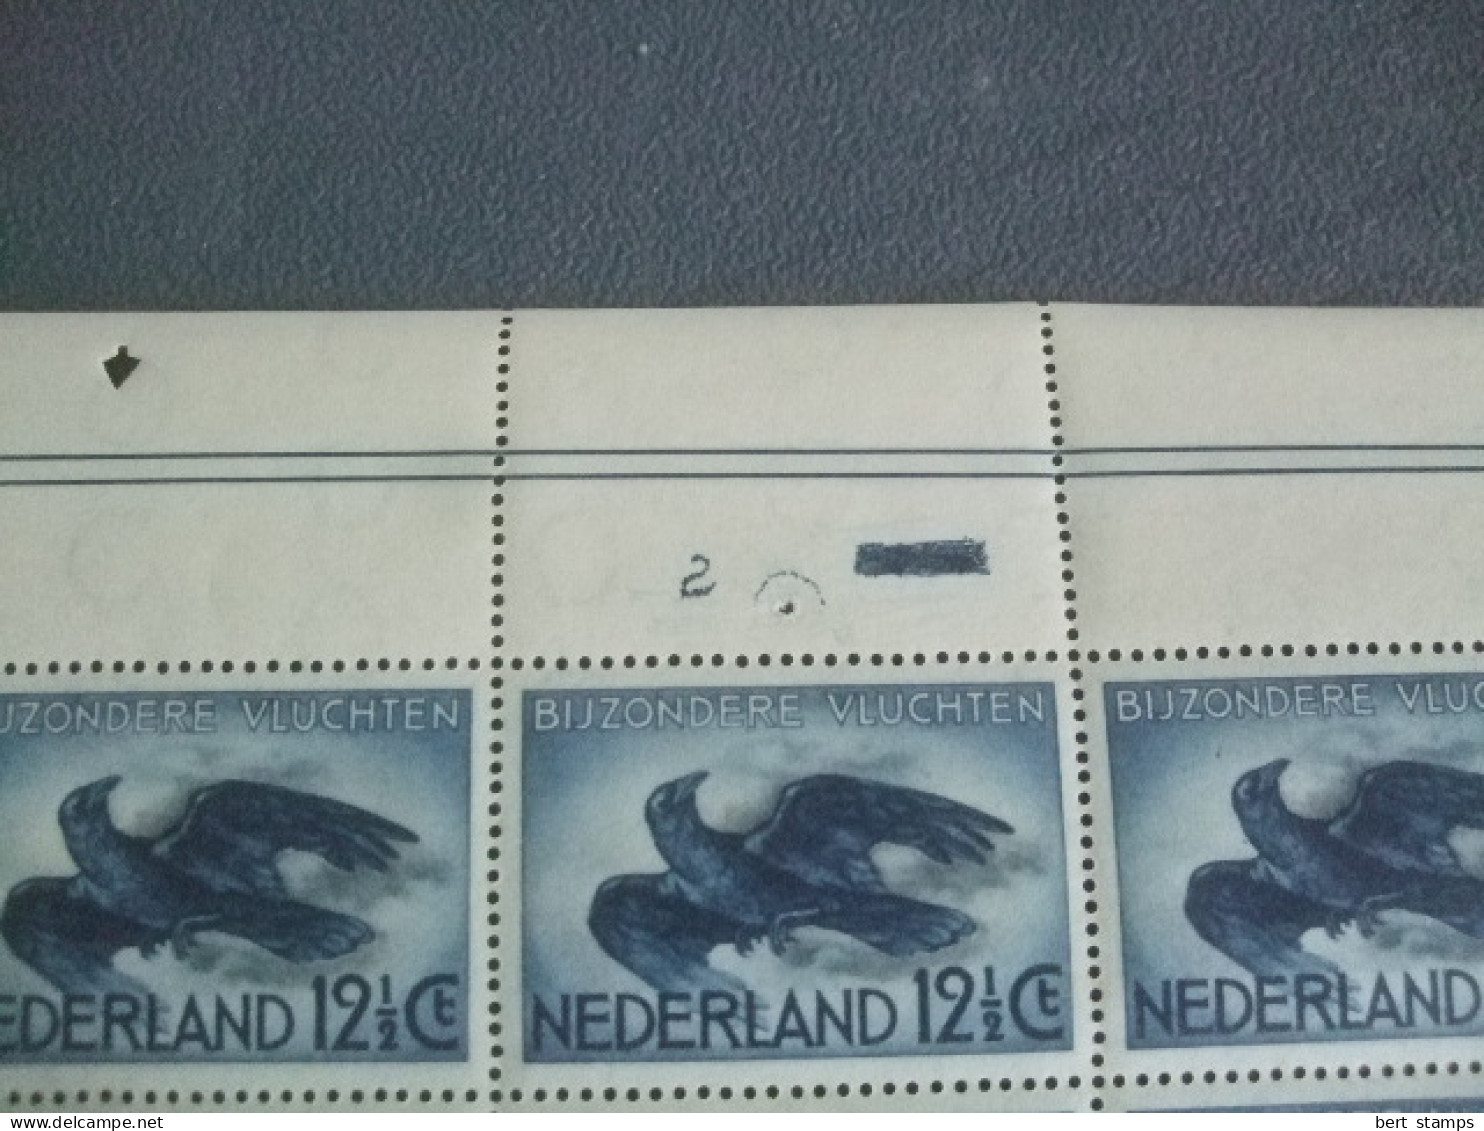 Netherlands Nice compleet sheet Airmail LP 11, MNH  thematic Birds flying Crow. also plate errors!!!